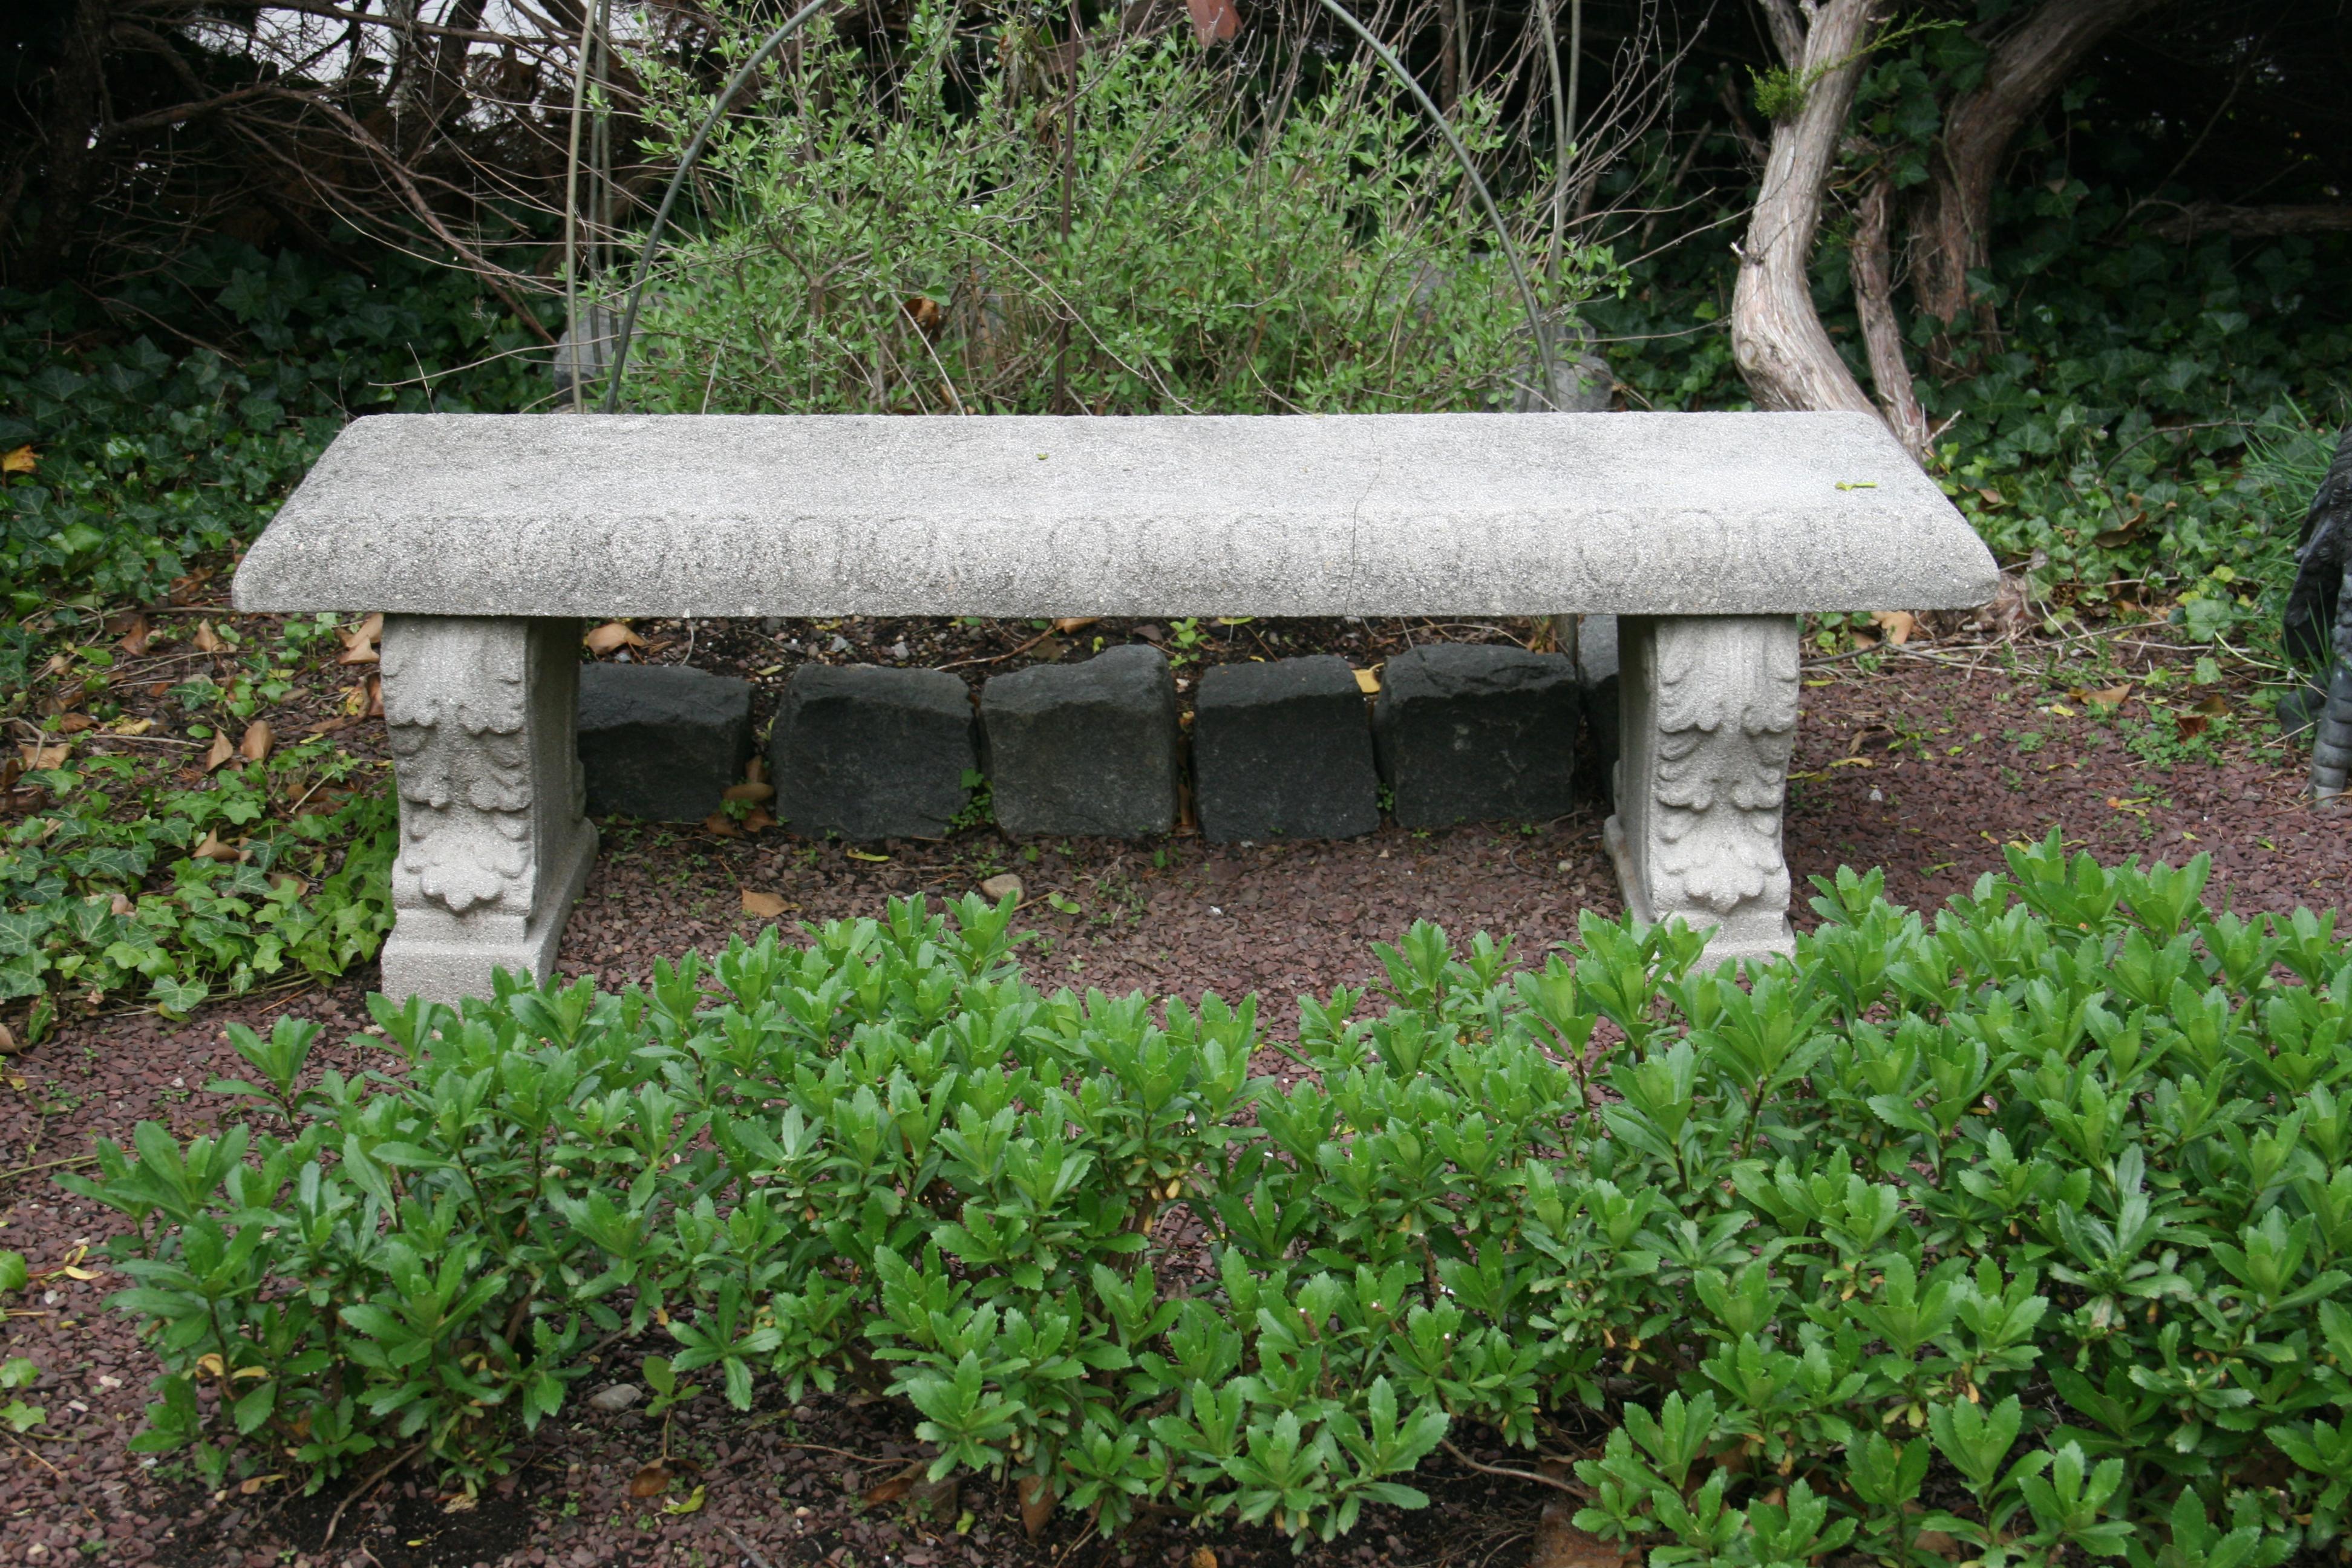 3-1126 A handsome English garden long bench or seat of composition stone,
featuring gadroon edge rectangular top set upon two scroll supports with a relief design of acanthus leaf.